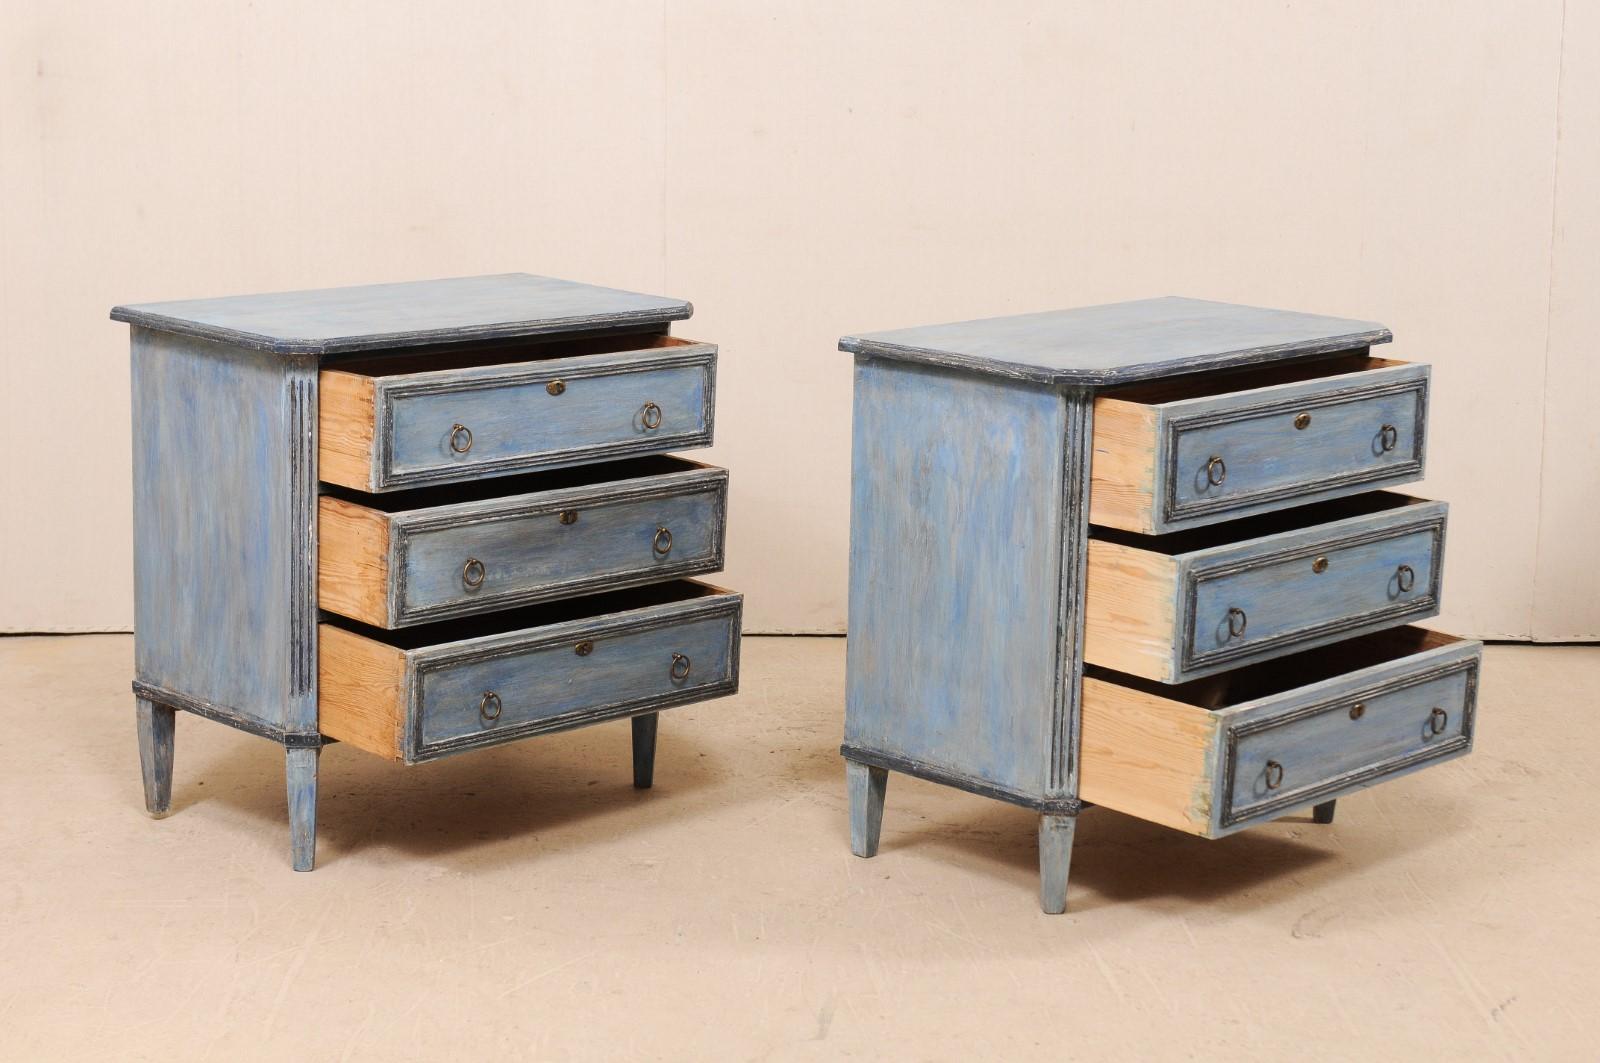 Pair of Swedish Midcentury Painted Wood Three-Drawer Chests in Soft Blue Finish 2